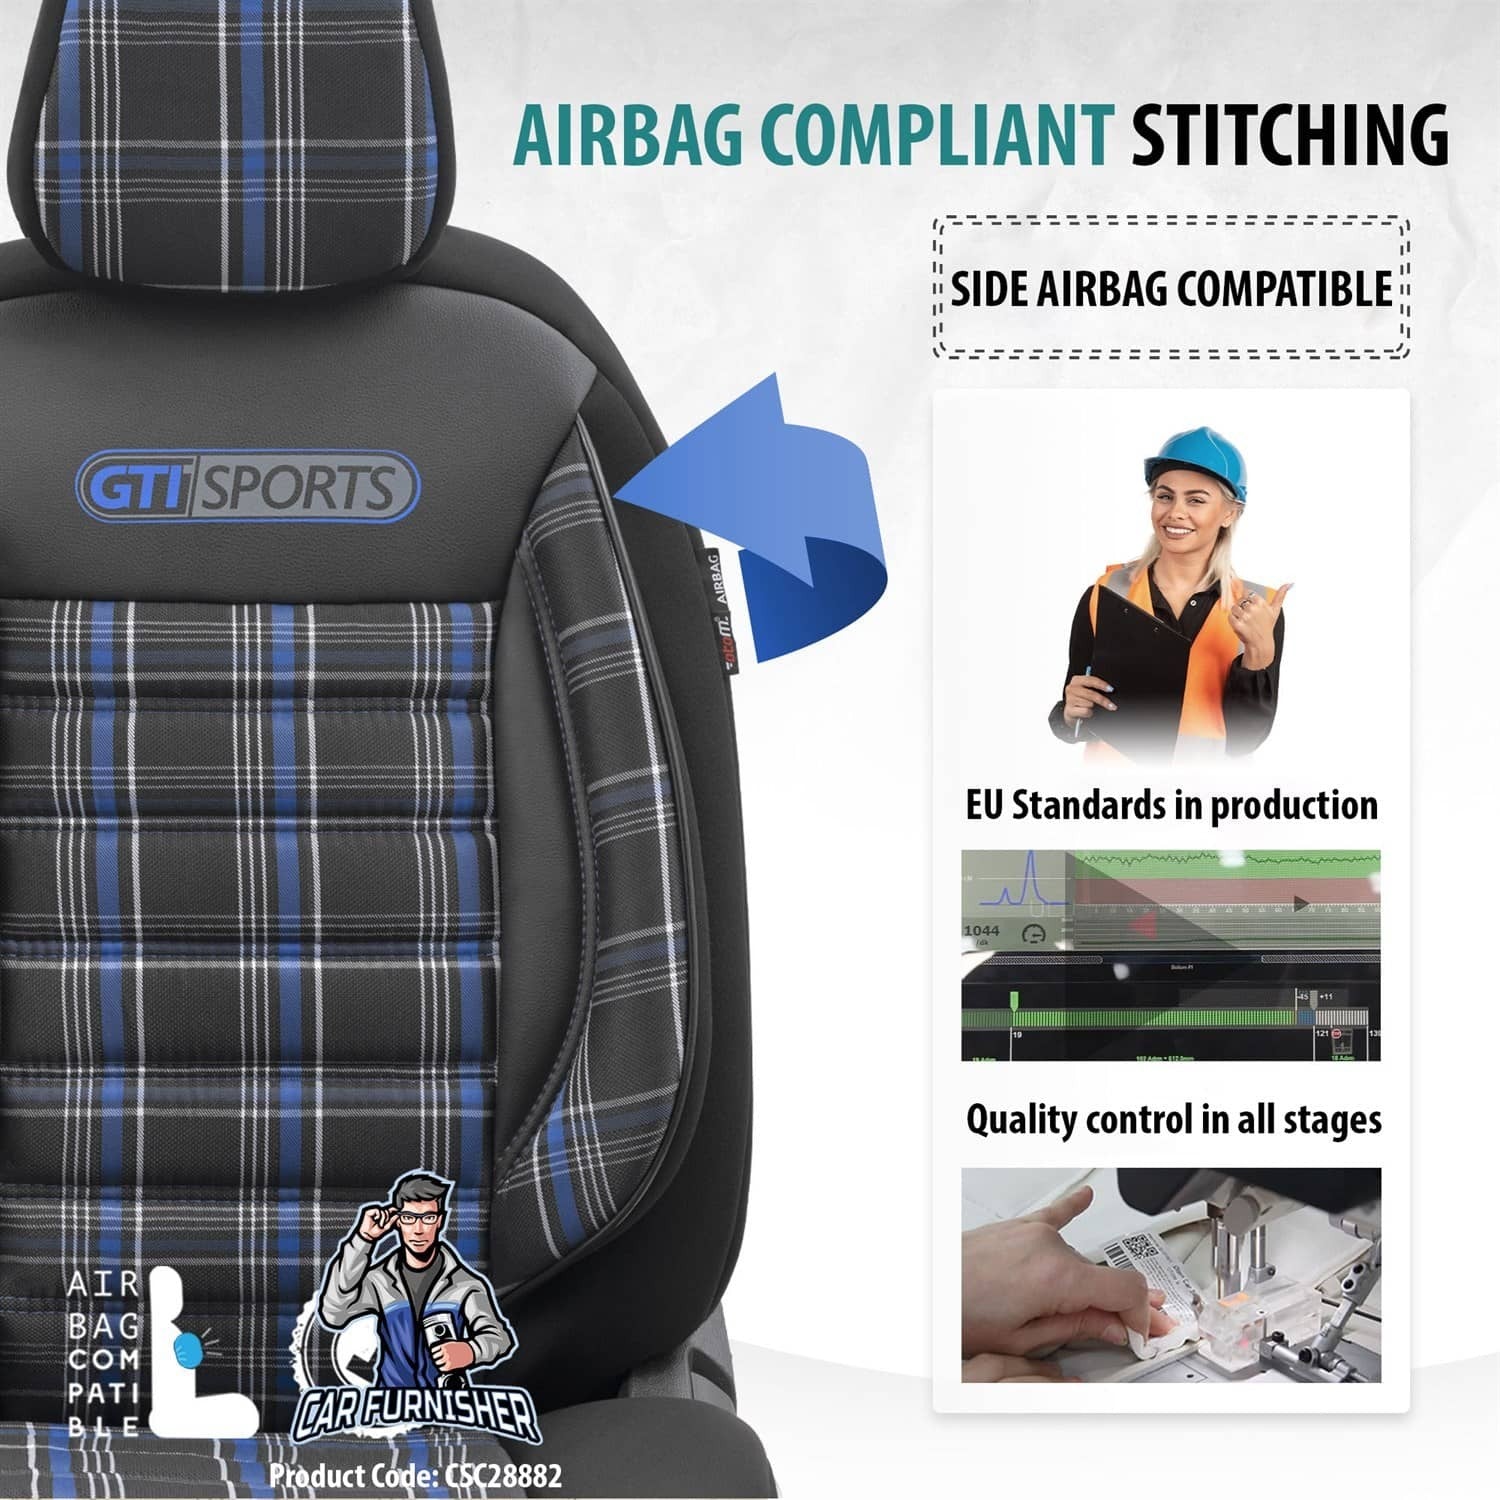 VW Polo GTI Car Seat Covers MK3/MK4/MK5/MK6 1995-2024 Special Series Blue 5 Seats + Headrests (Full Set) Leather & Fabric